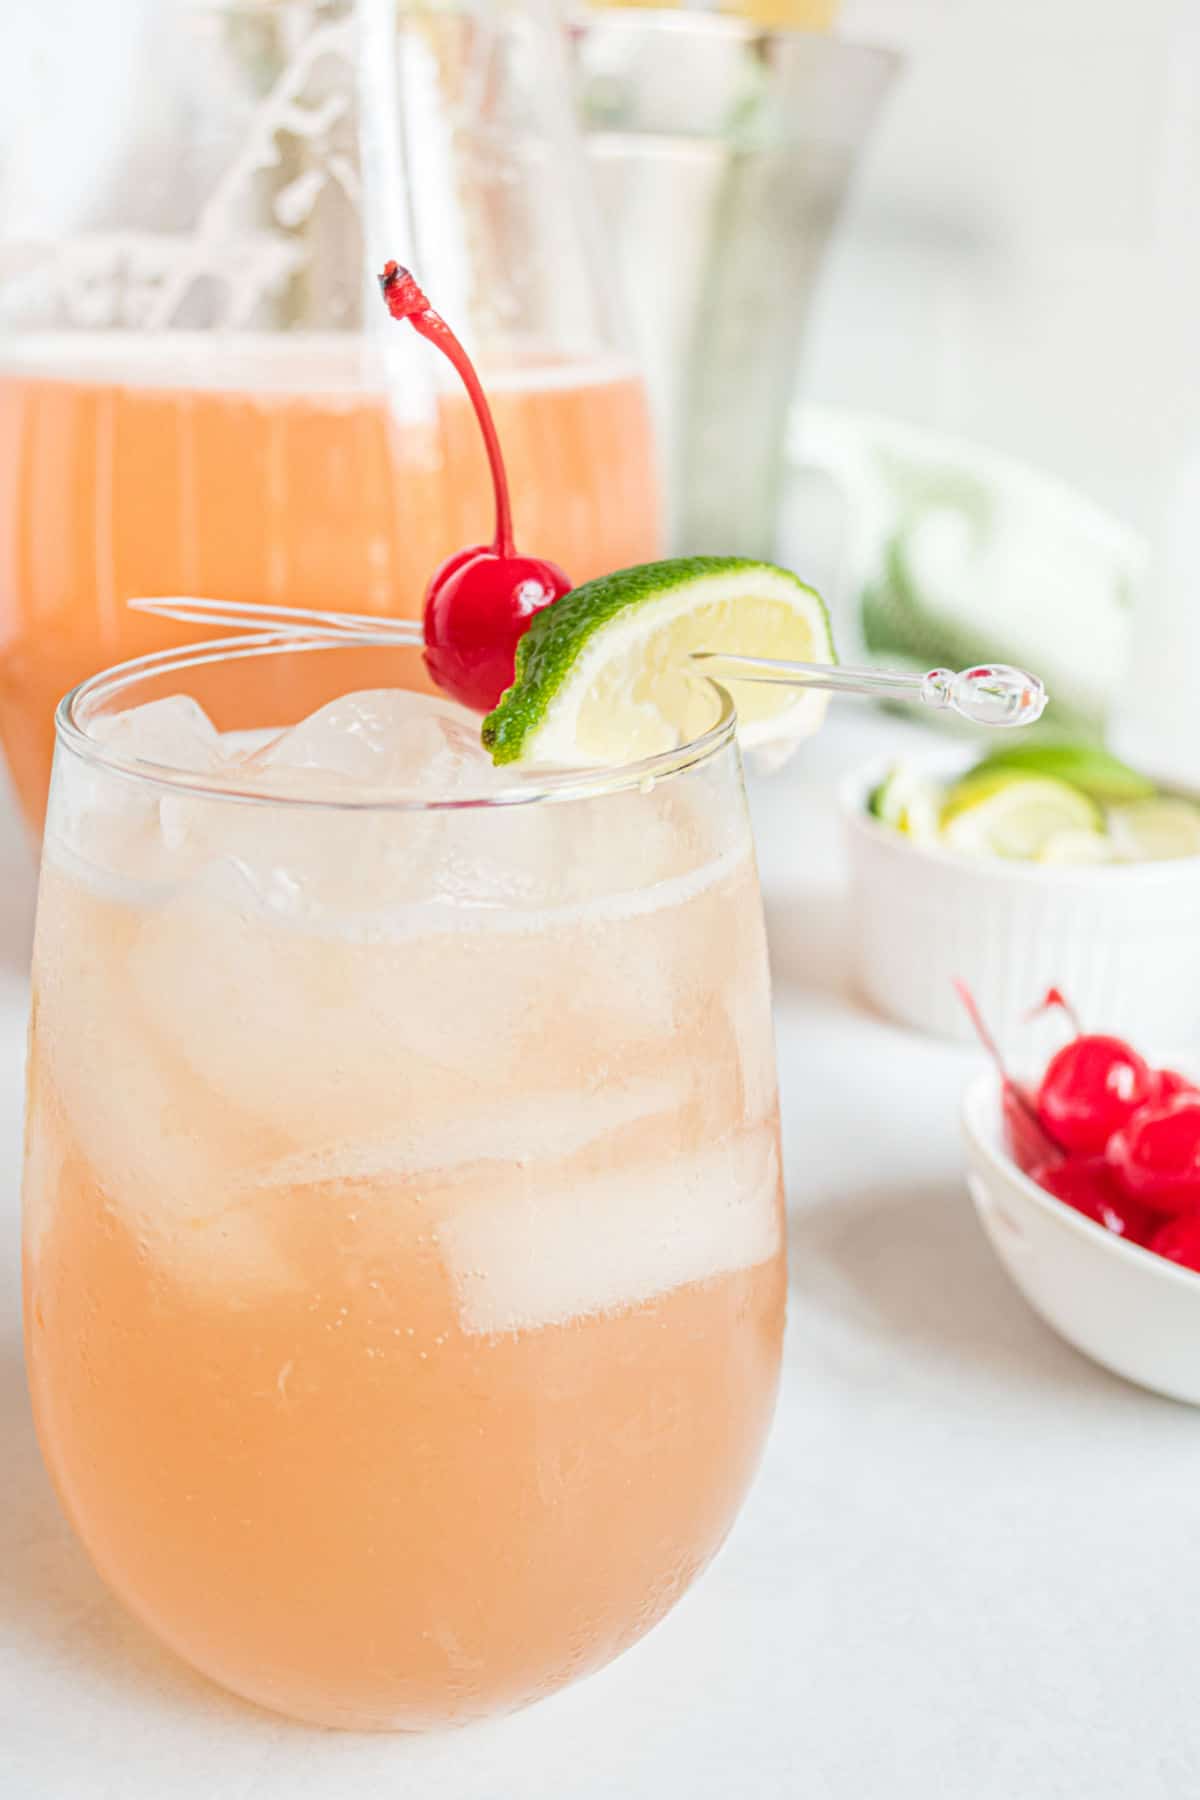 Clear glasses filled with iced cherry beer margaritas.